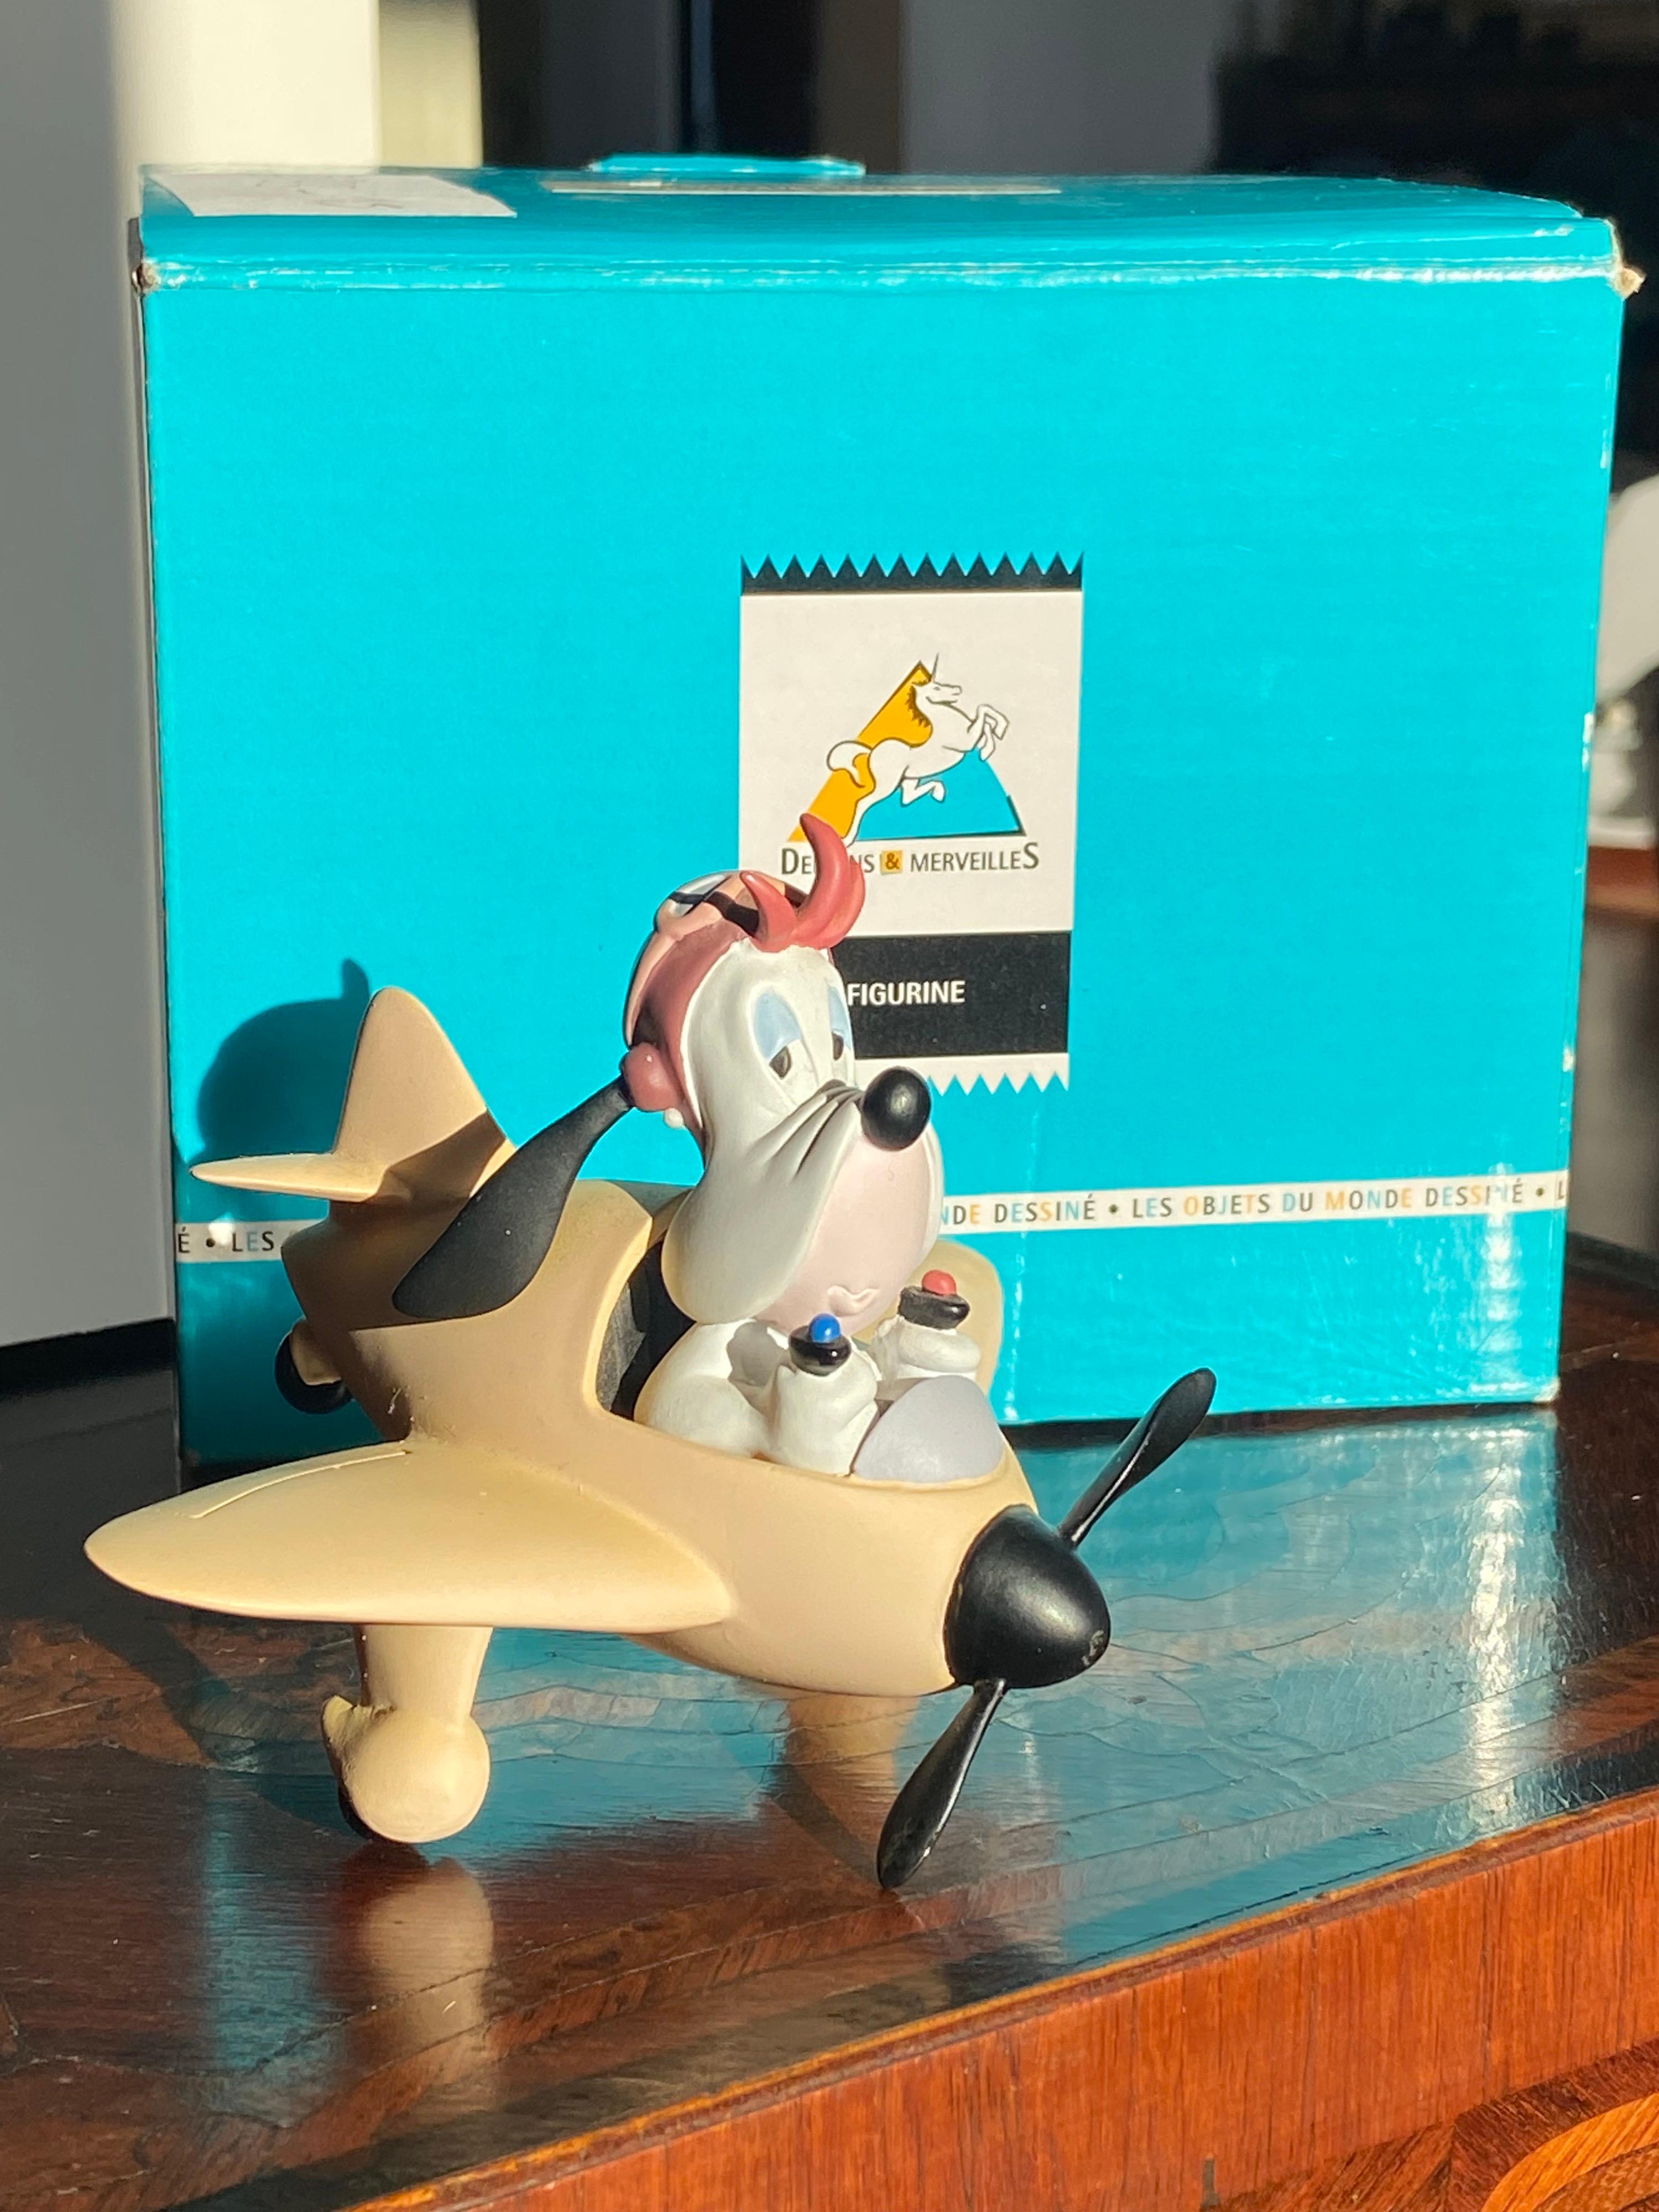 Figurine statue of Droopy on a plane by Demons & Merveilles.
Made in 2001 in its original box in perfect condition.
Perfect gift and a part of a large collection.
USA, 2001.